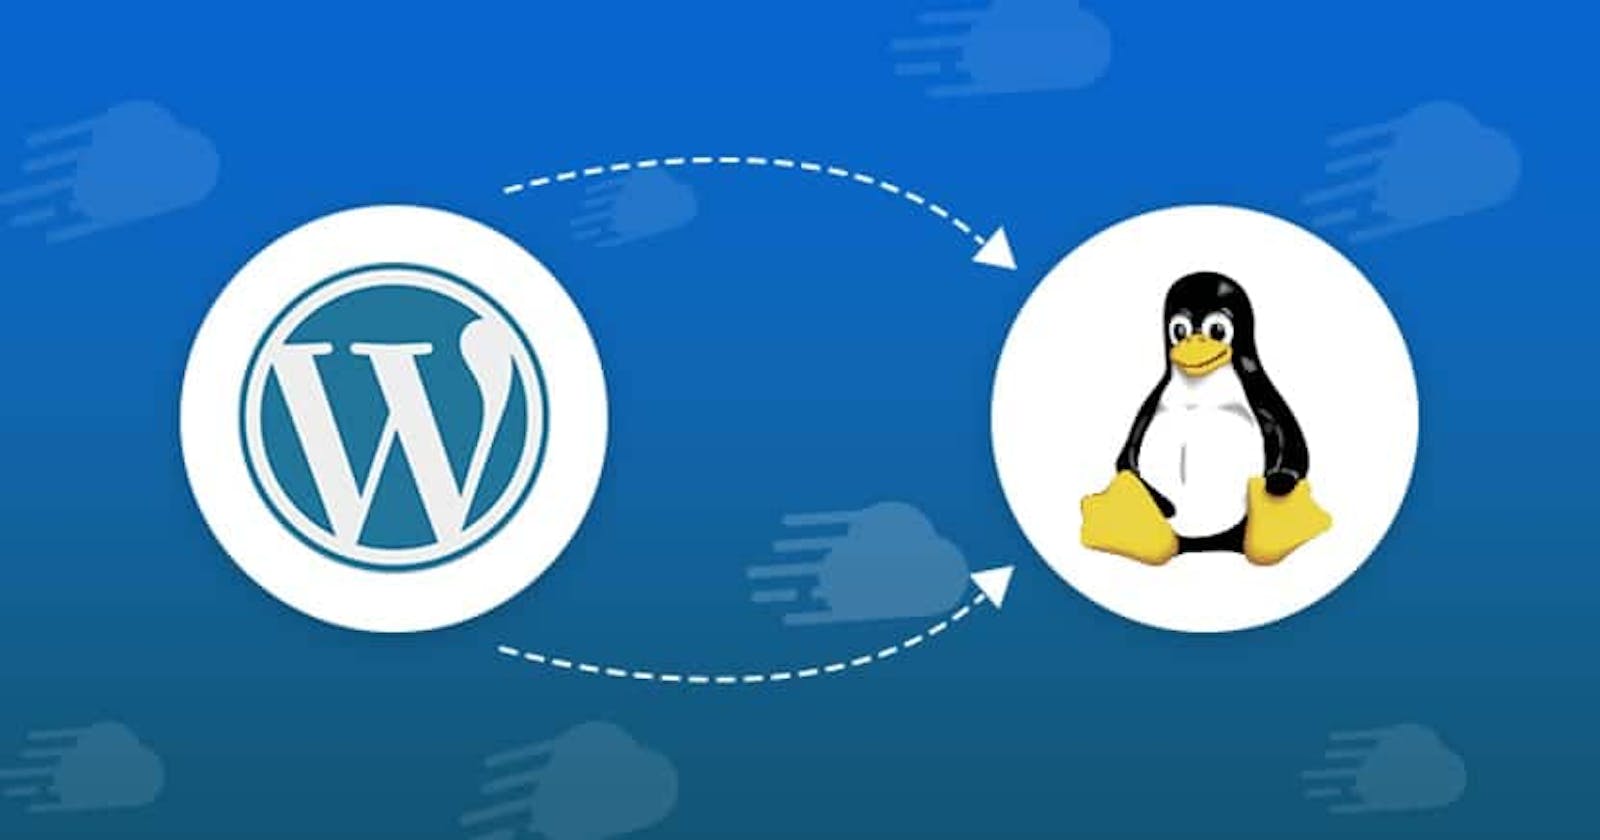 Setting Up WordPress on Linux Using Vagrant Virtual Machine - Easy Step-by-Step Guide